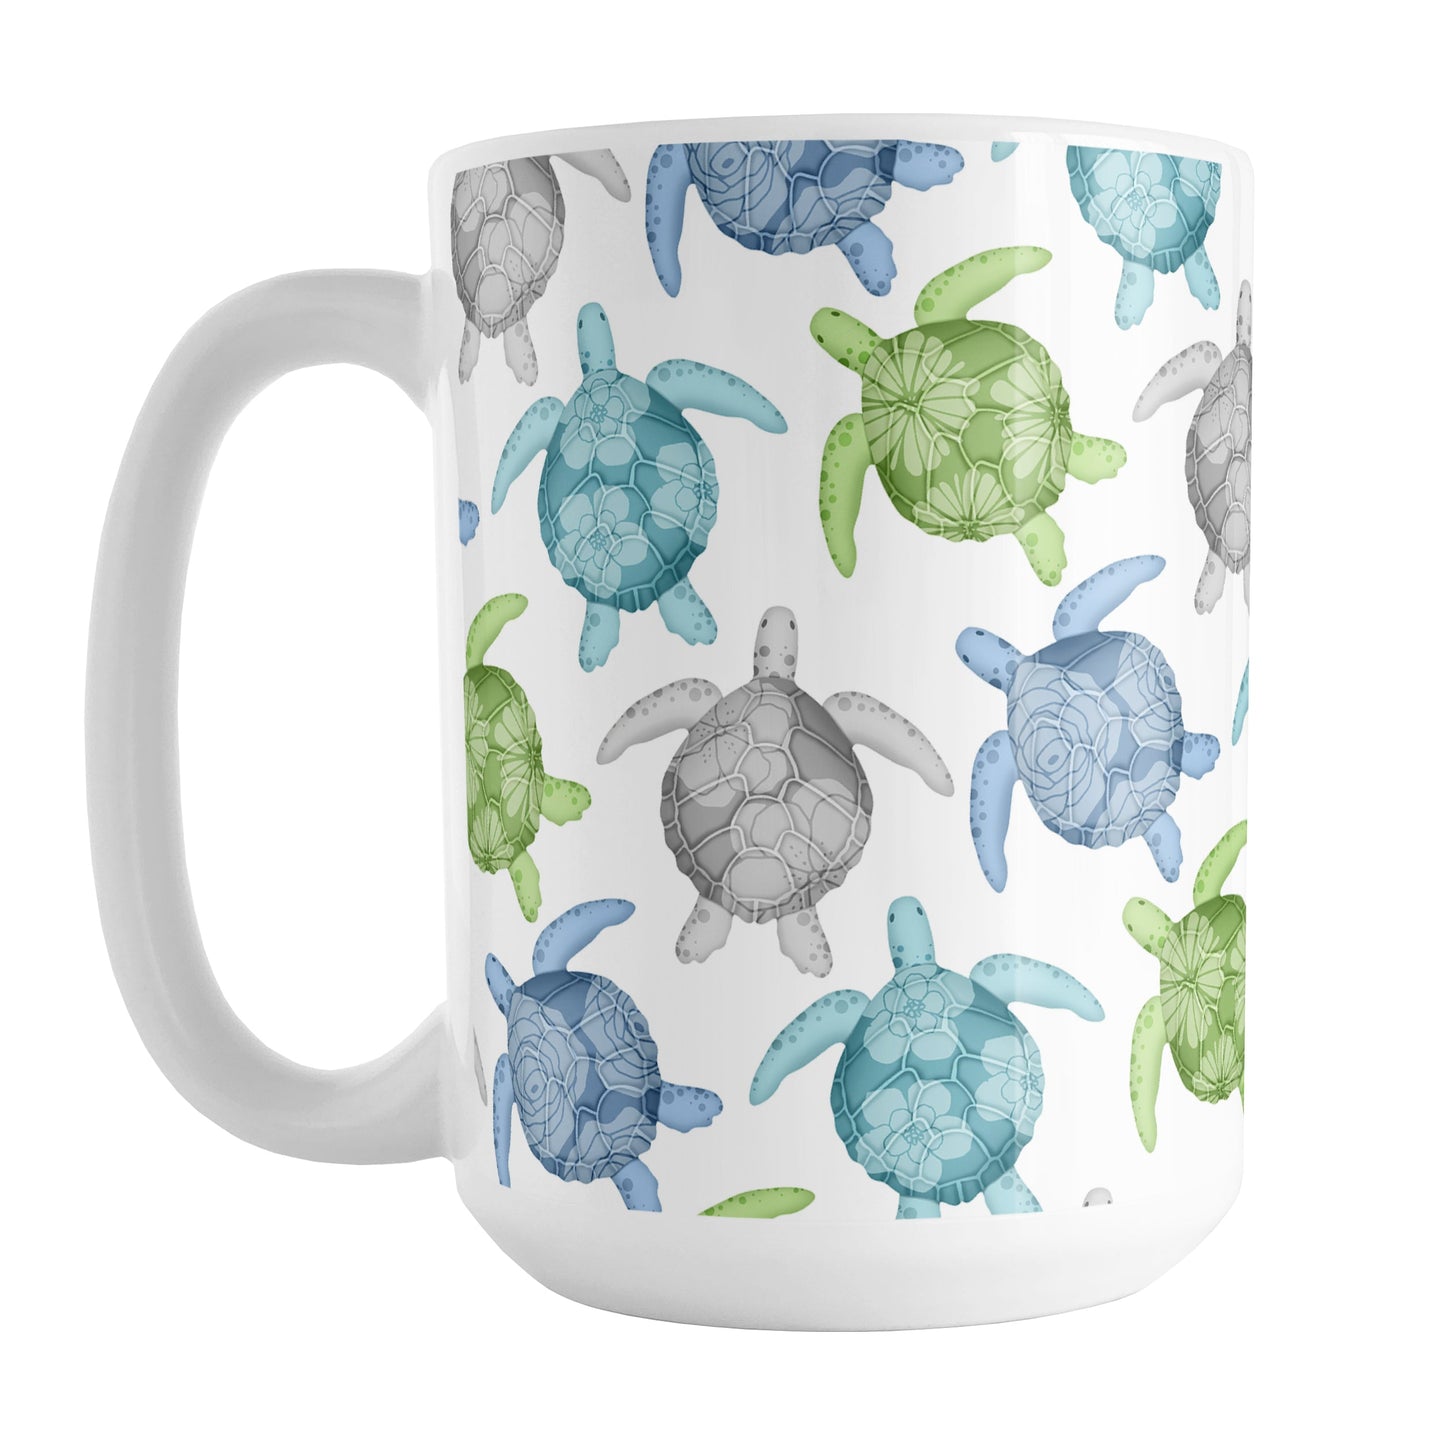 Cool Sea Turtles Pattern Mug (15oz) at Amy's Coffee Mugs. A ceramic mug with a pattern of sea turtles in a cool color palette of blue, green, turquoise and gray that wraps around the mug to the handle. Each cool colored sea turtle has a different floral watermark over its shell.